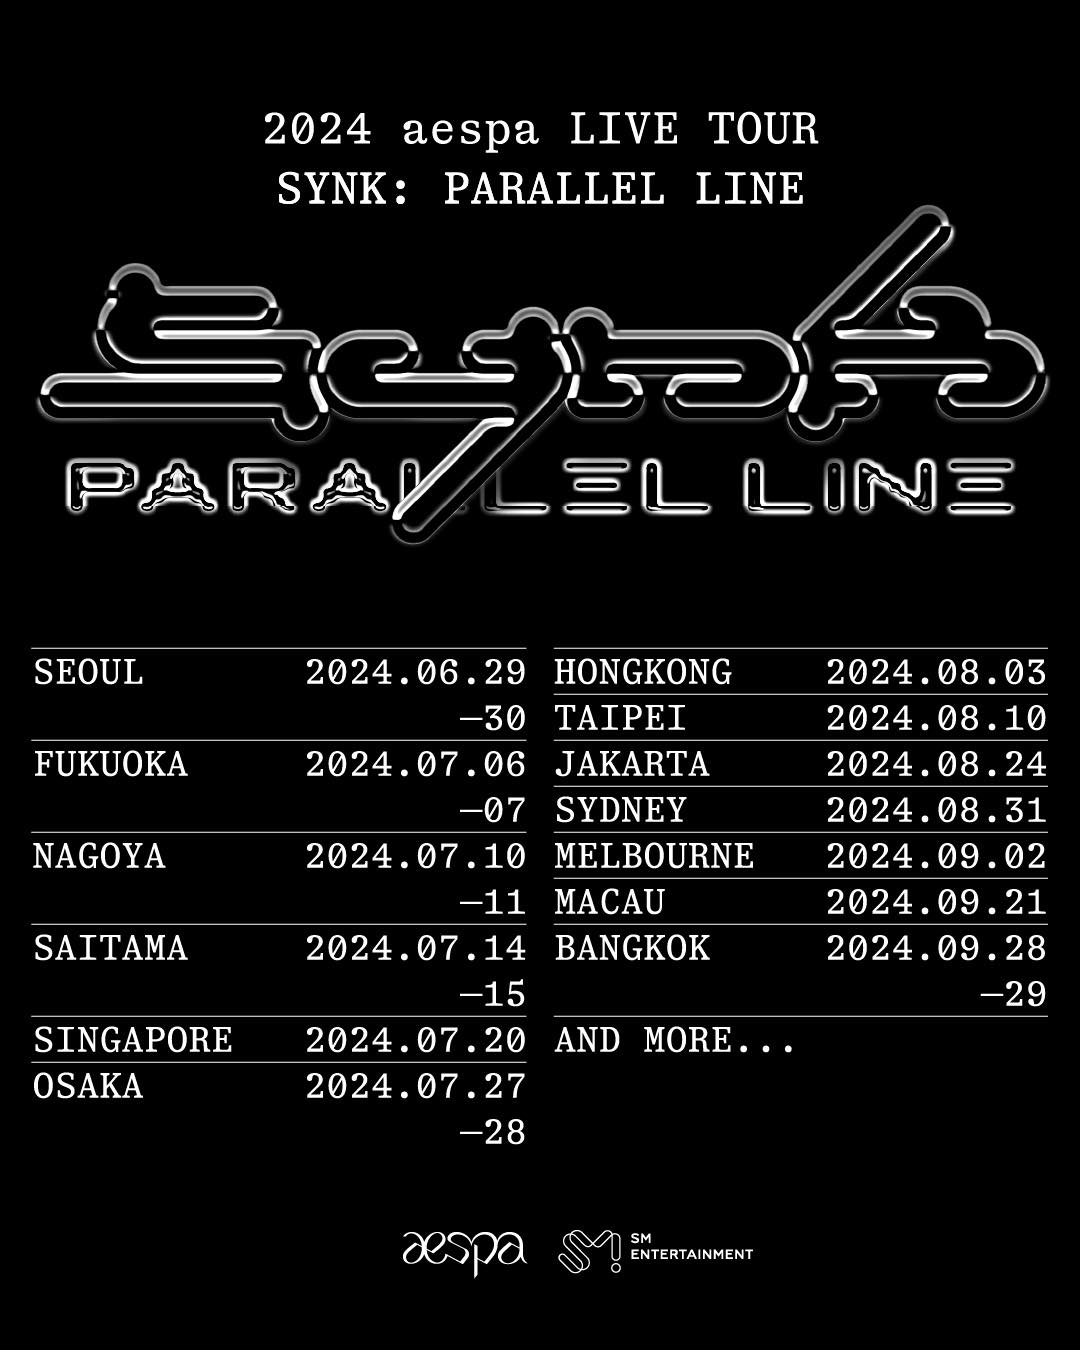 2024 aespa LIVE TOUR SYNK Parallel Line Taipei｜Concert